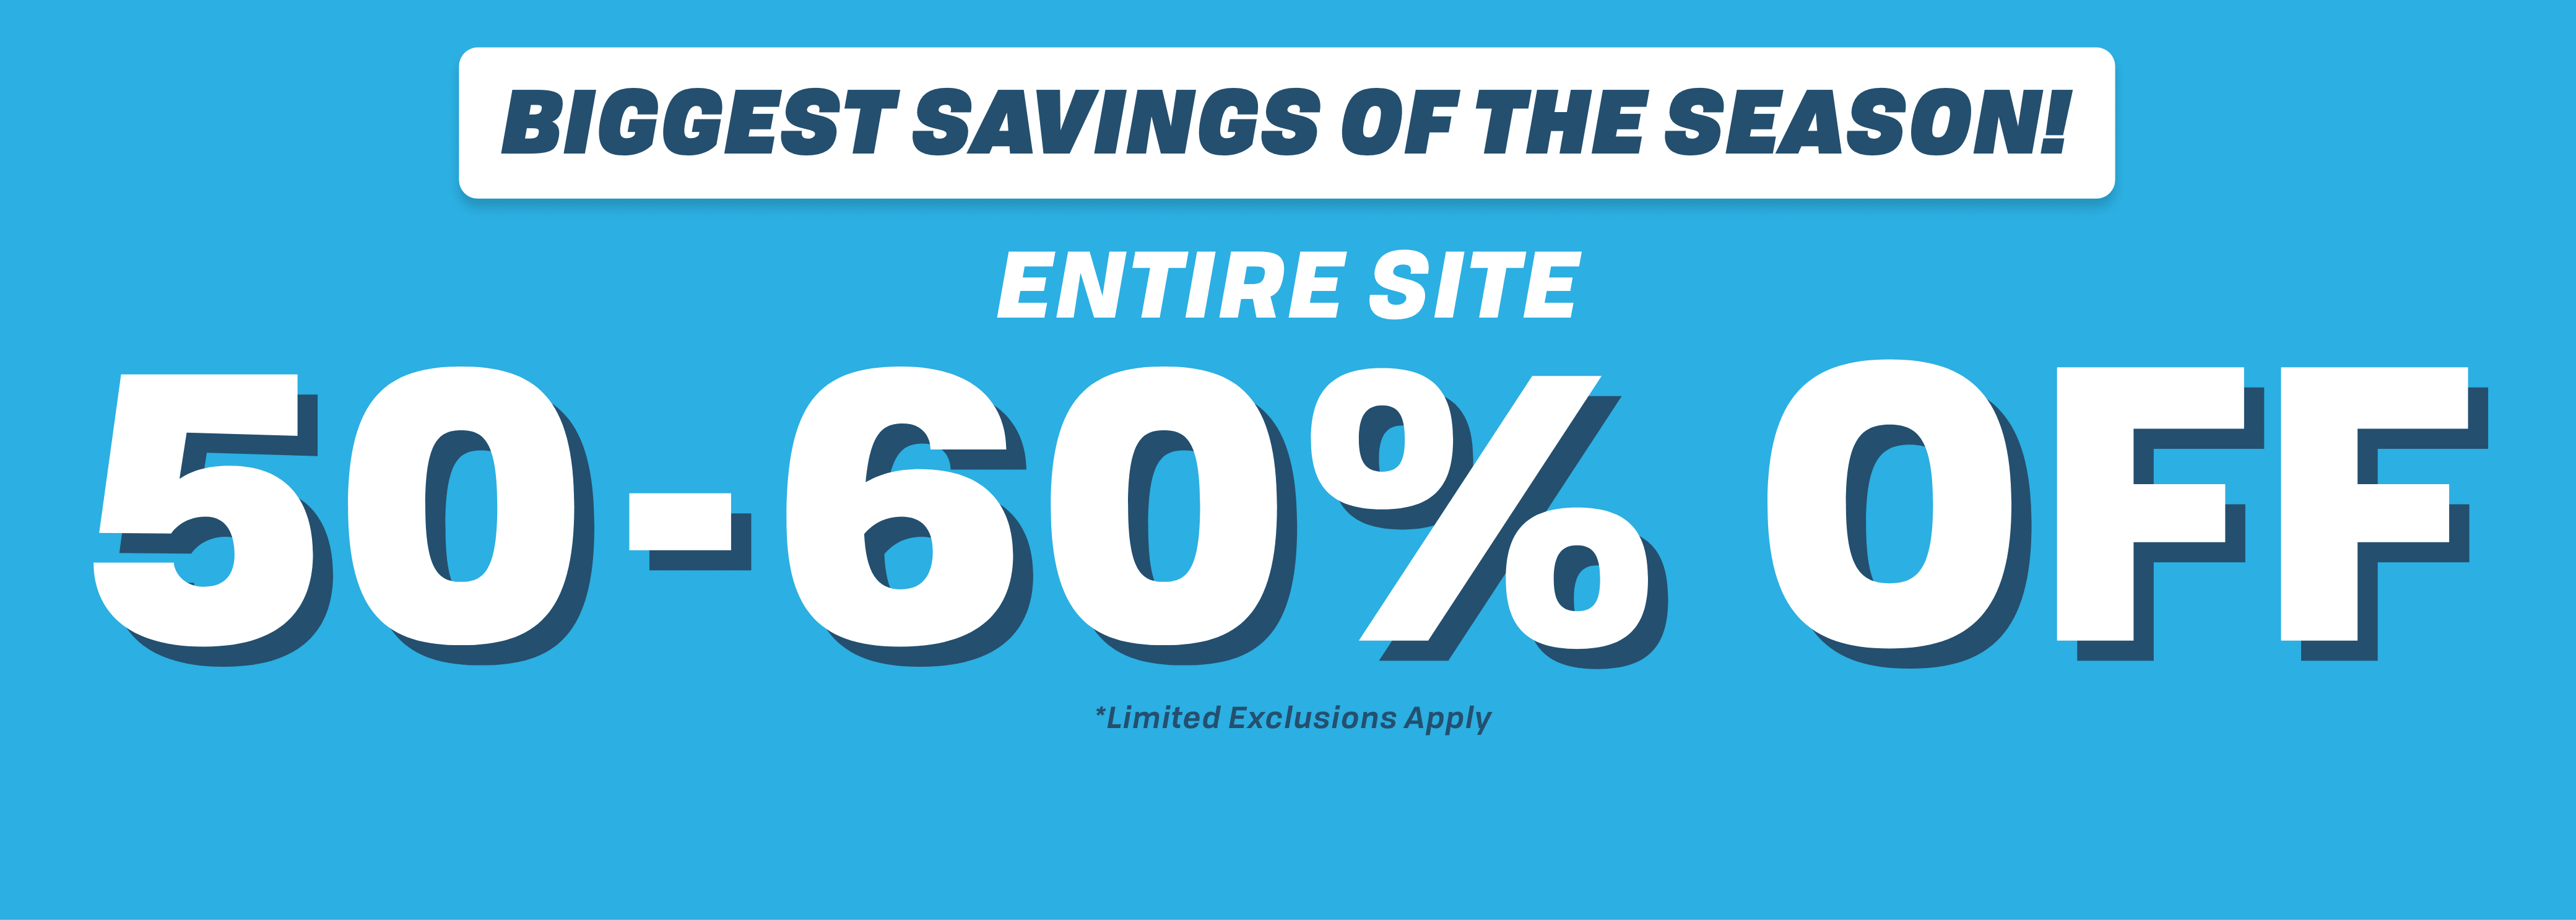 BIGGEST SAVINGS OF the SEASON! ENTIRE SITE 50-60% OFF | Limited Exclusions Apply